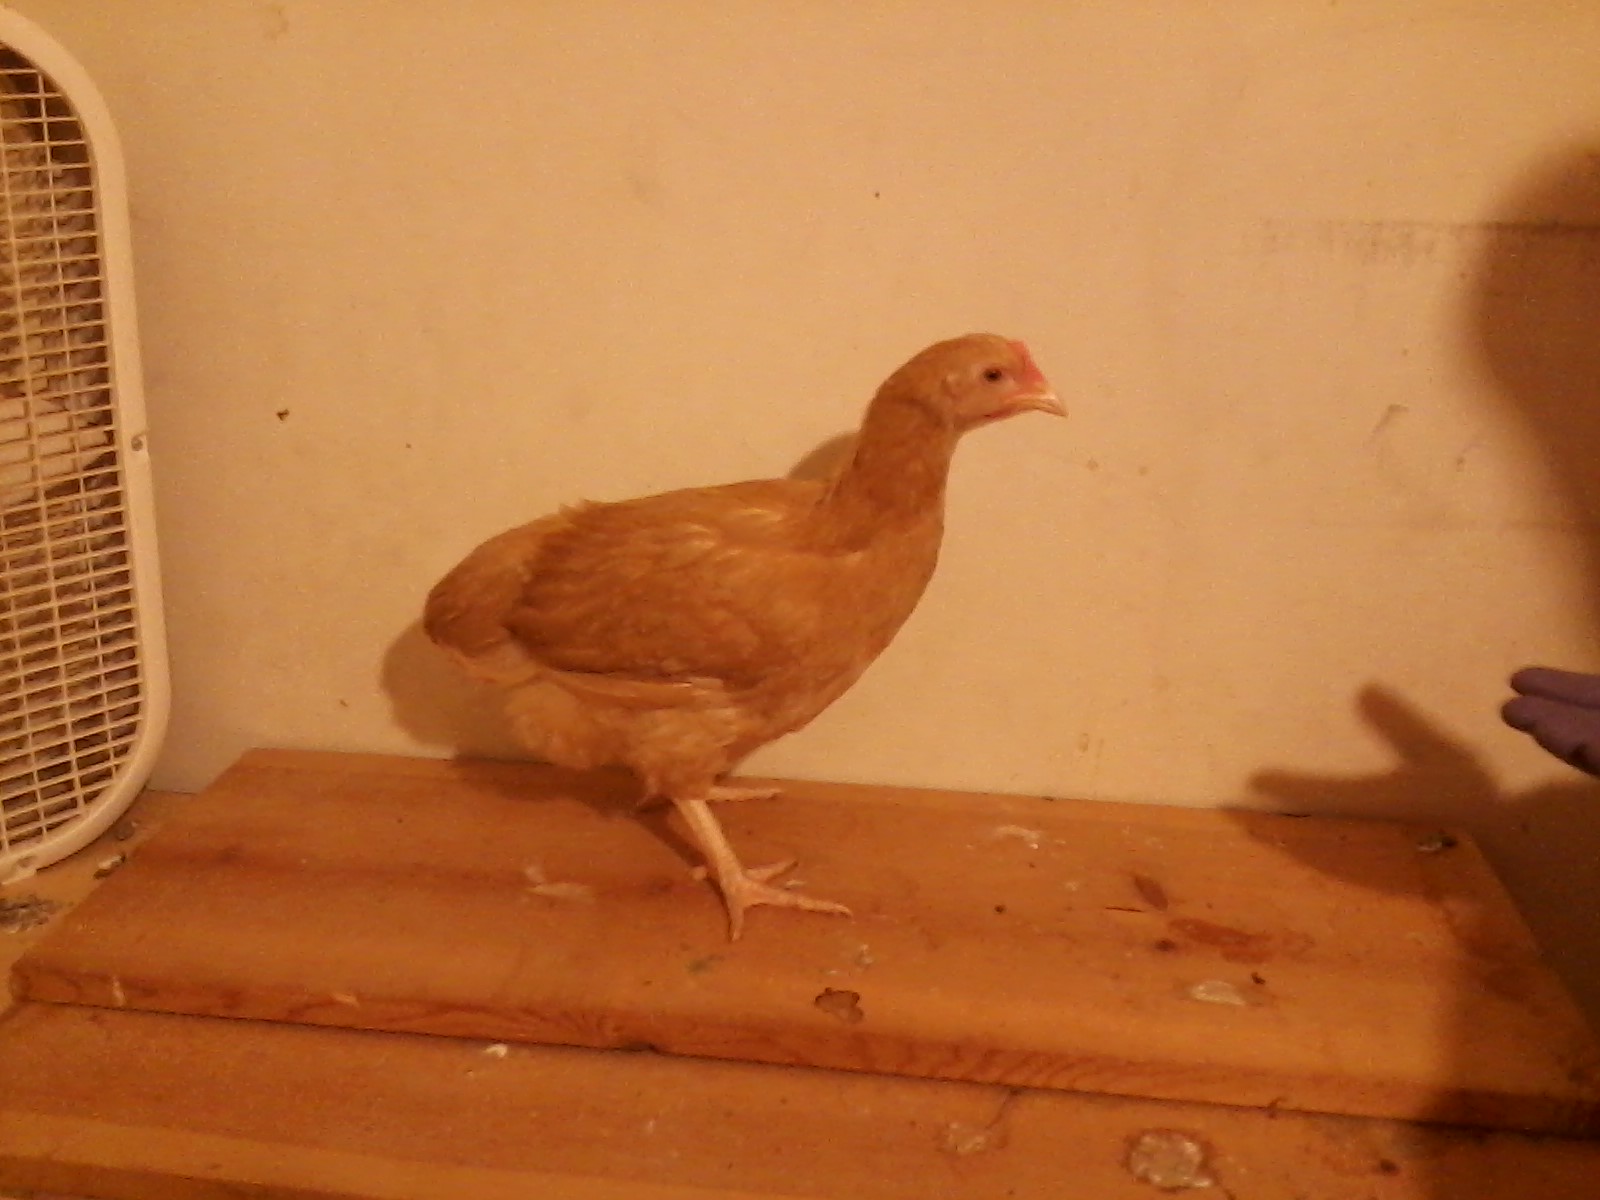 Ping, a.k.a. Biscuit, a Buff Orpington pullet approximately 9 weeks old.